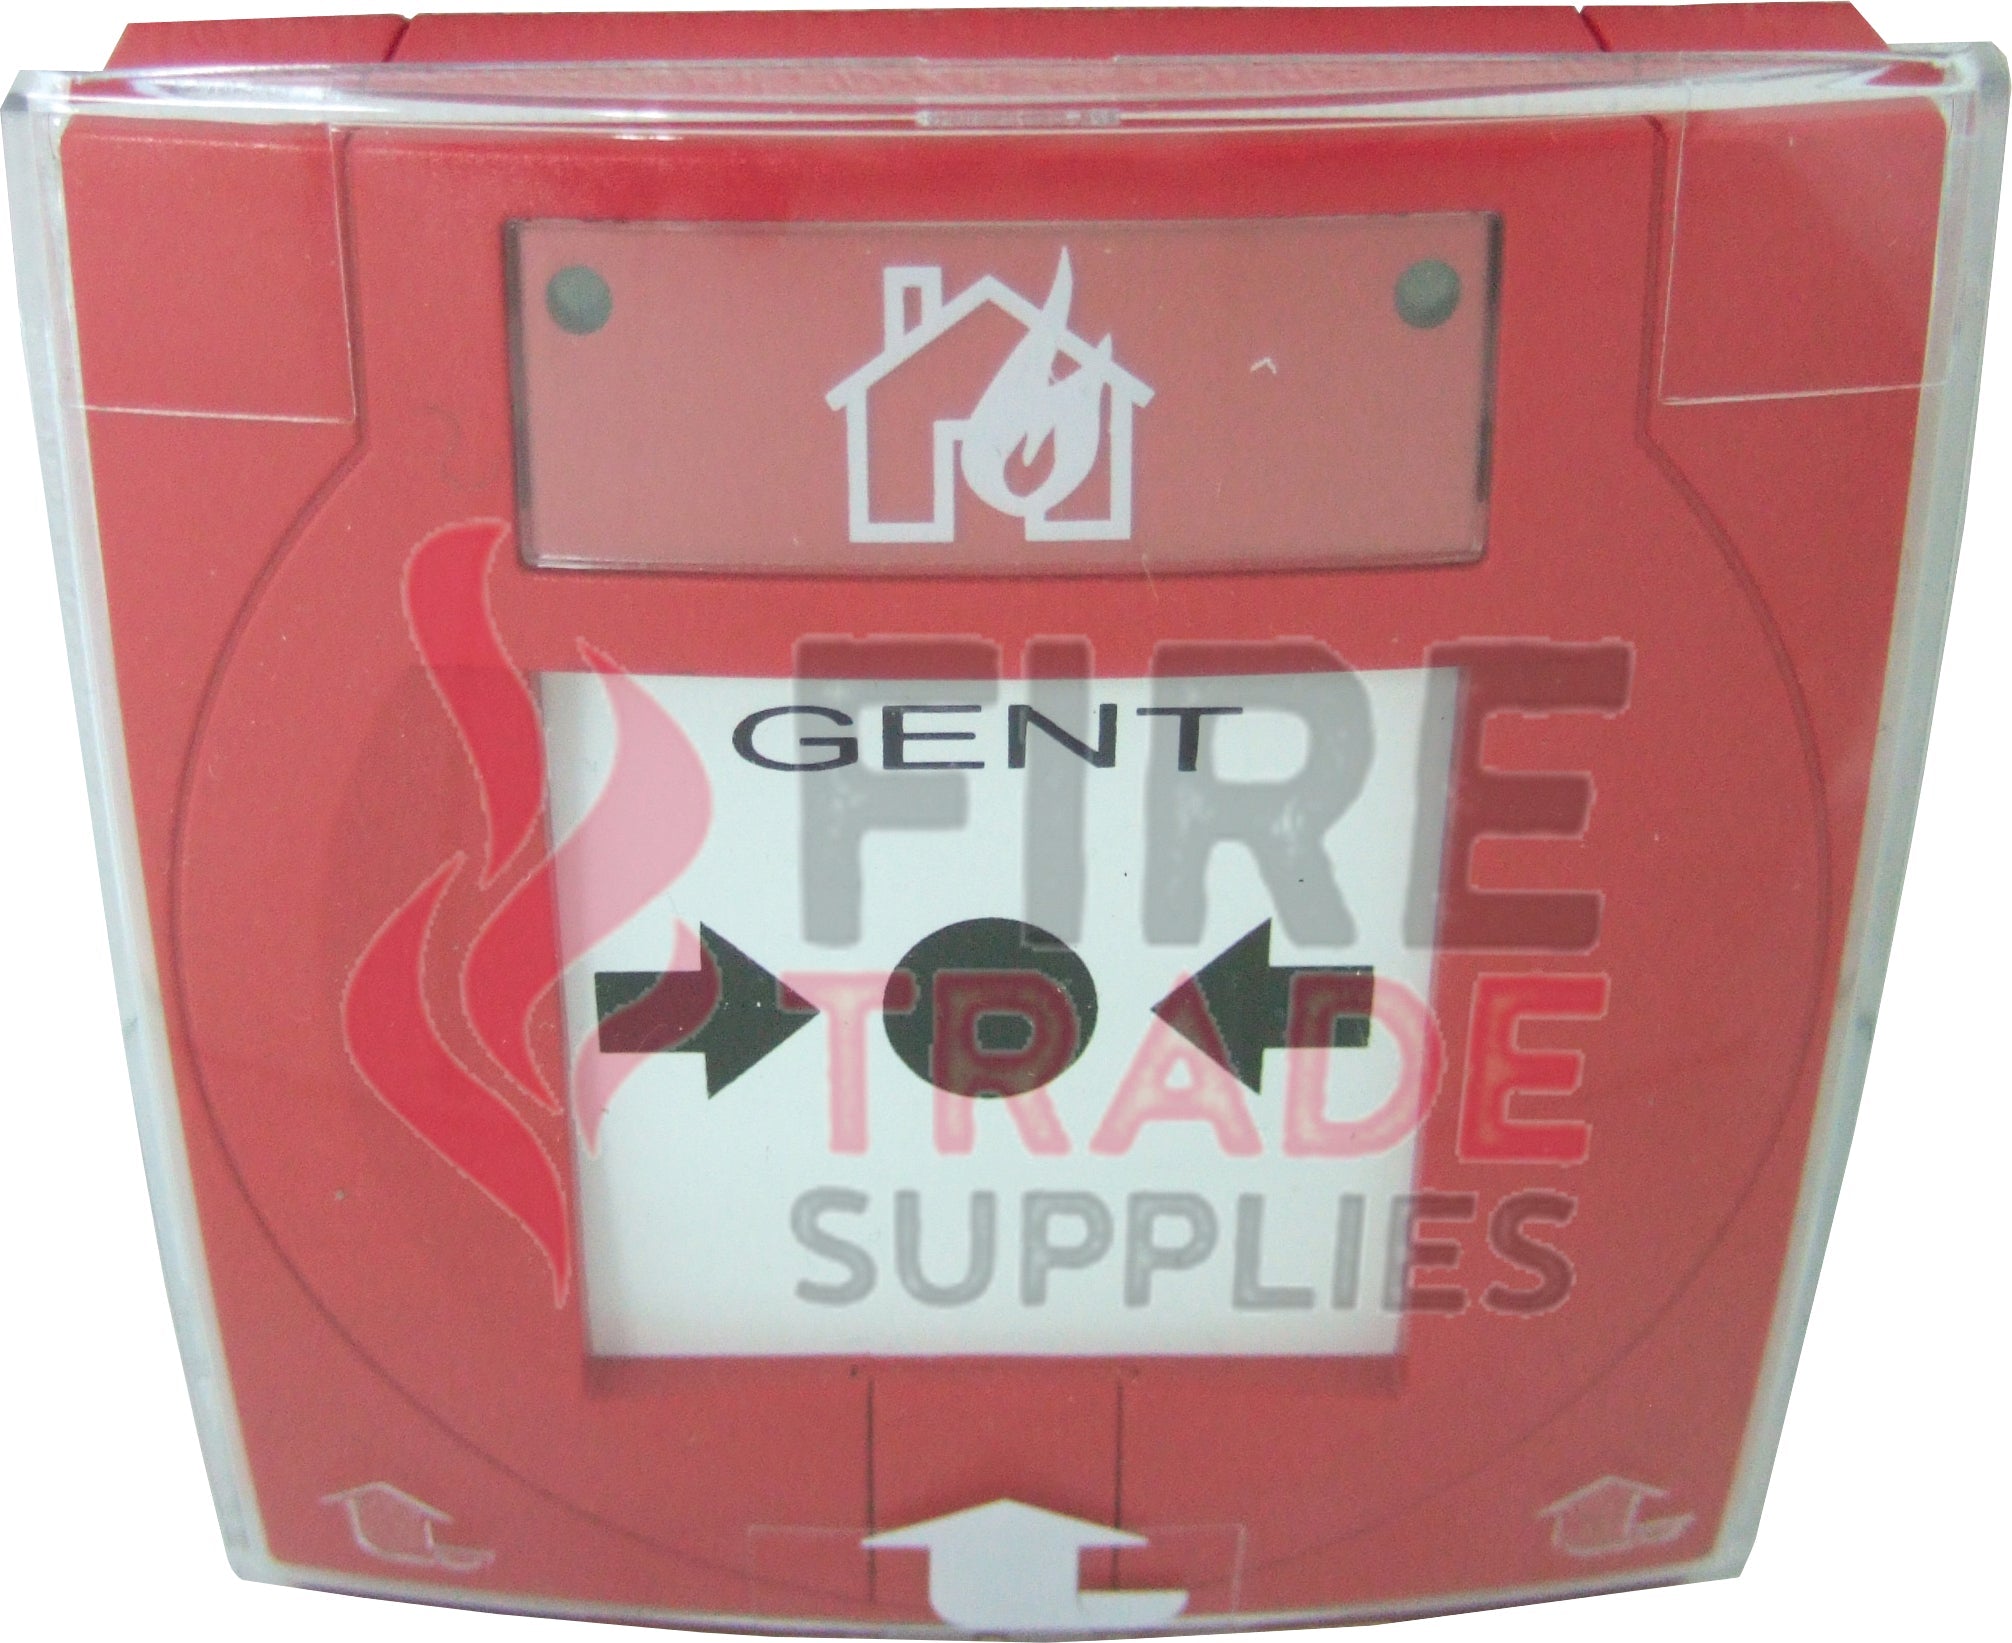 S4-34842 Vigilon Manual Call Point with Glass Element & Protective Cover (Ex Back Box) - Fire Trade Supplies